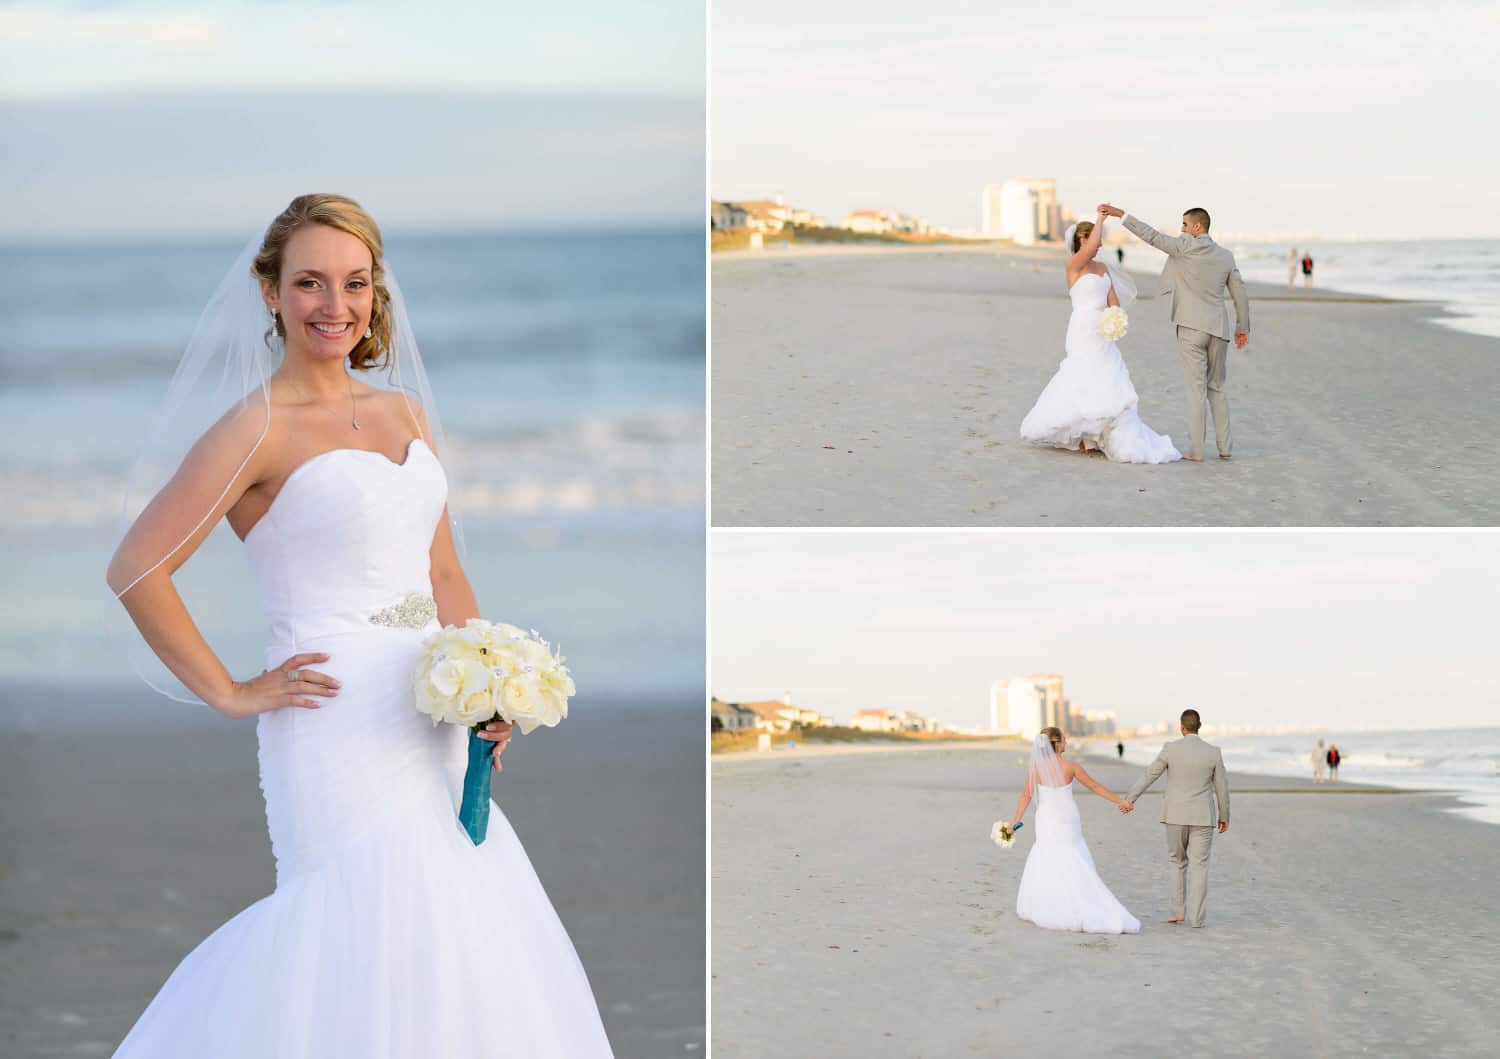 Sunset pictures of bride